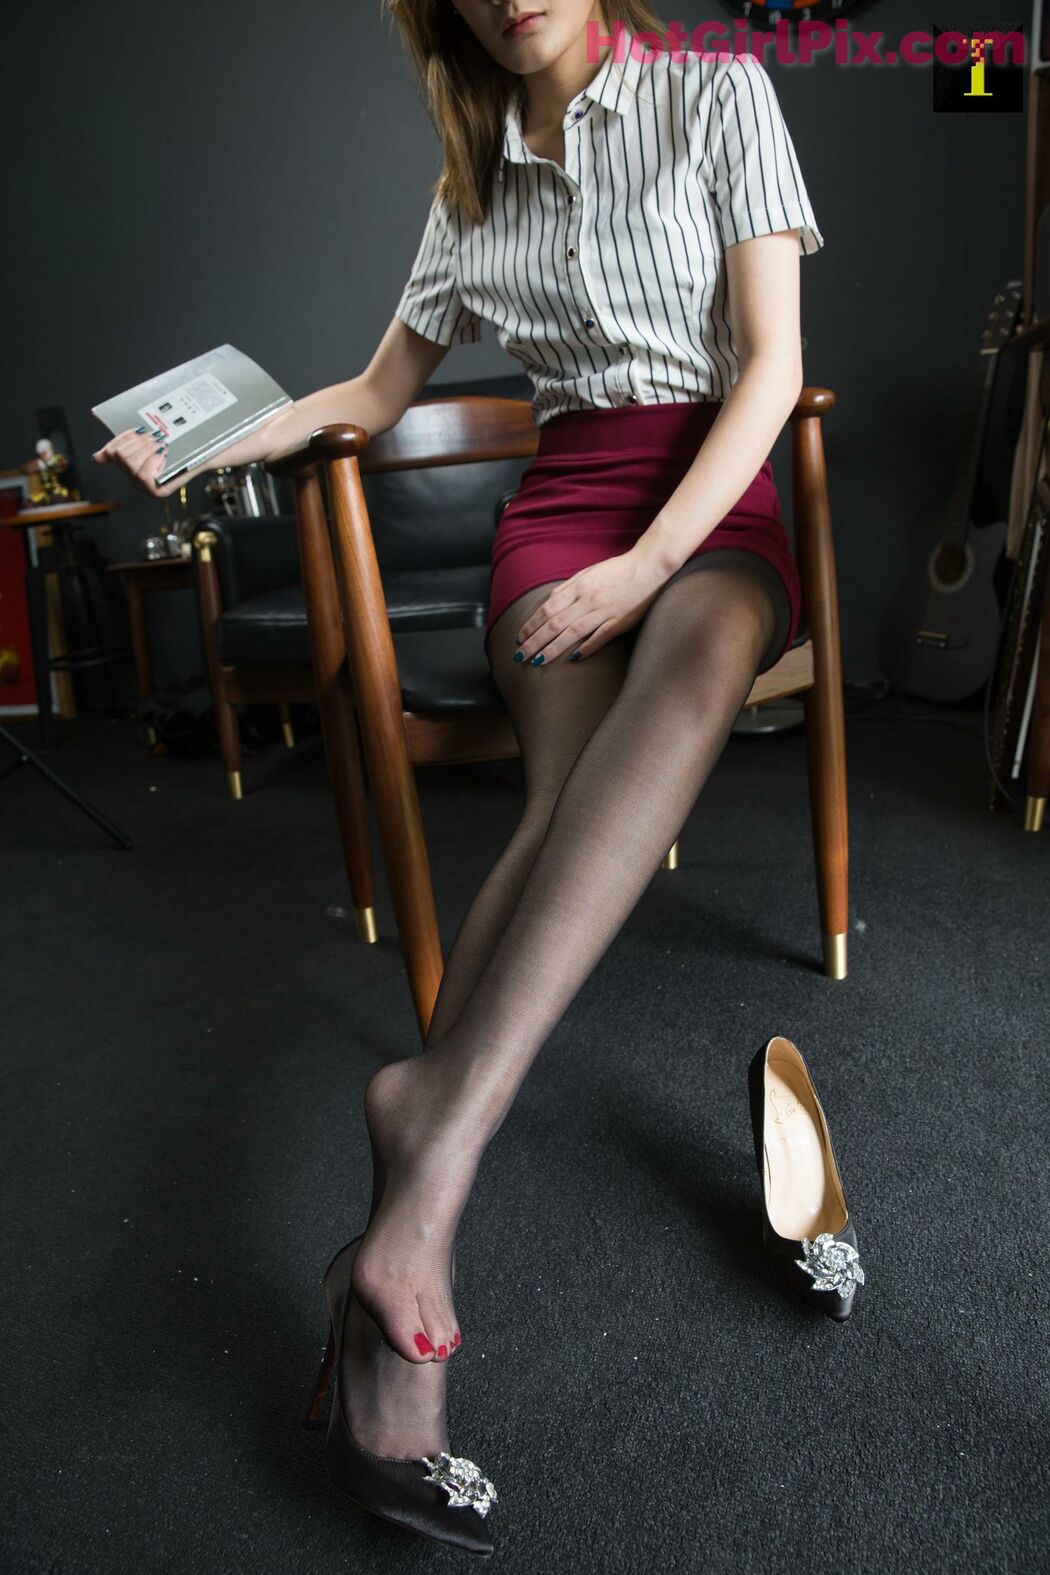 [IESS] Ziwei "Life is like a play, it depends on acting" Beautiful legs in stockings